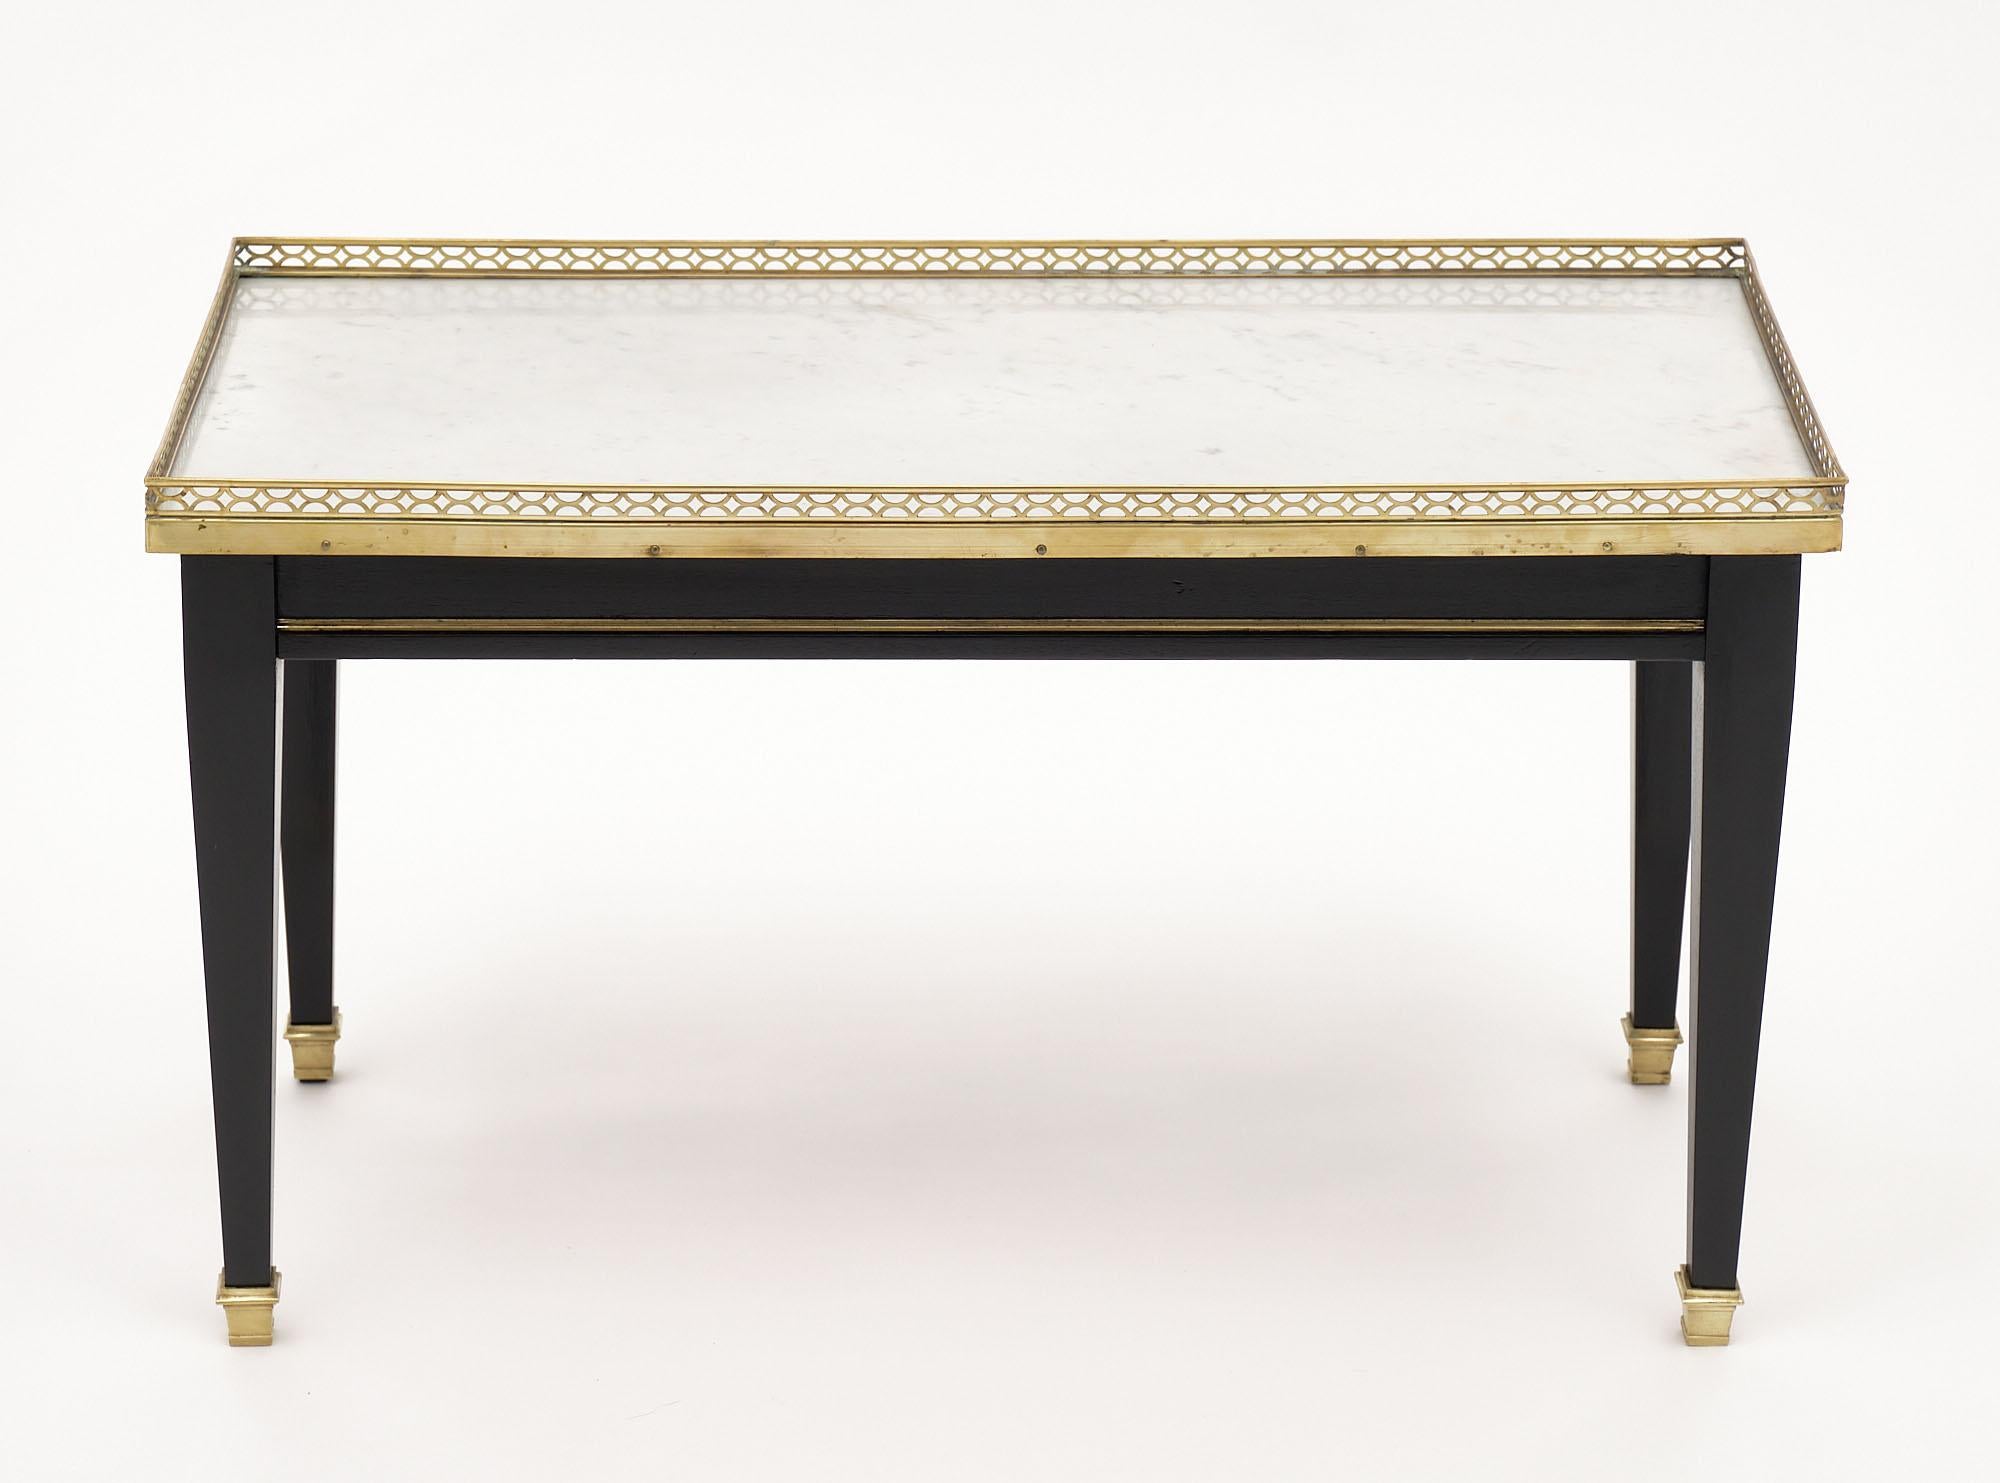 Coffee table from France in the Louis XVI style. This table features four tapered legs, a dovetailed drawer, and the original Carrara marble top. It is enhanced by the gilt brass gallery, bronze feet, and gilt brass trims. The wood has been finished